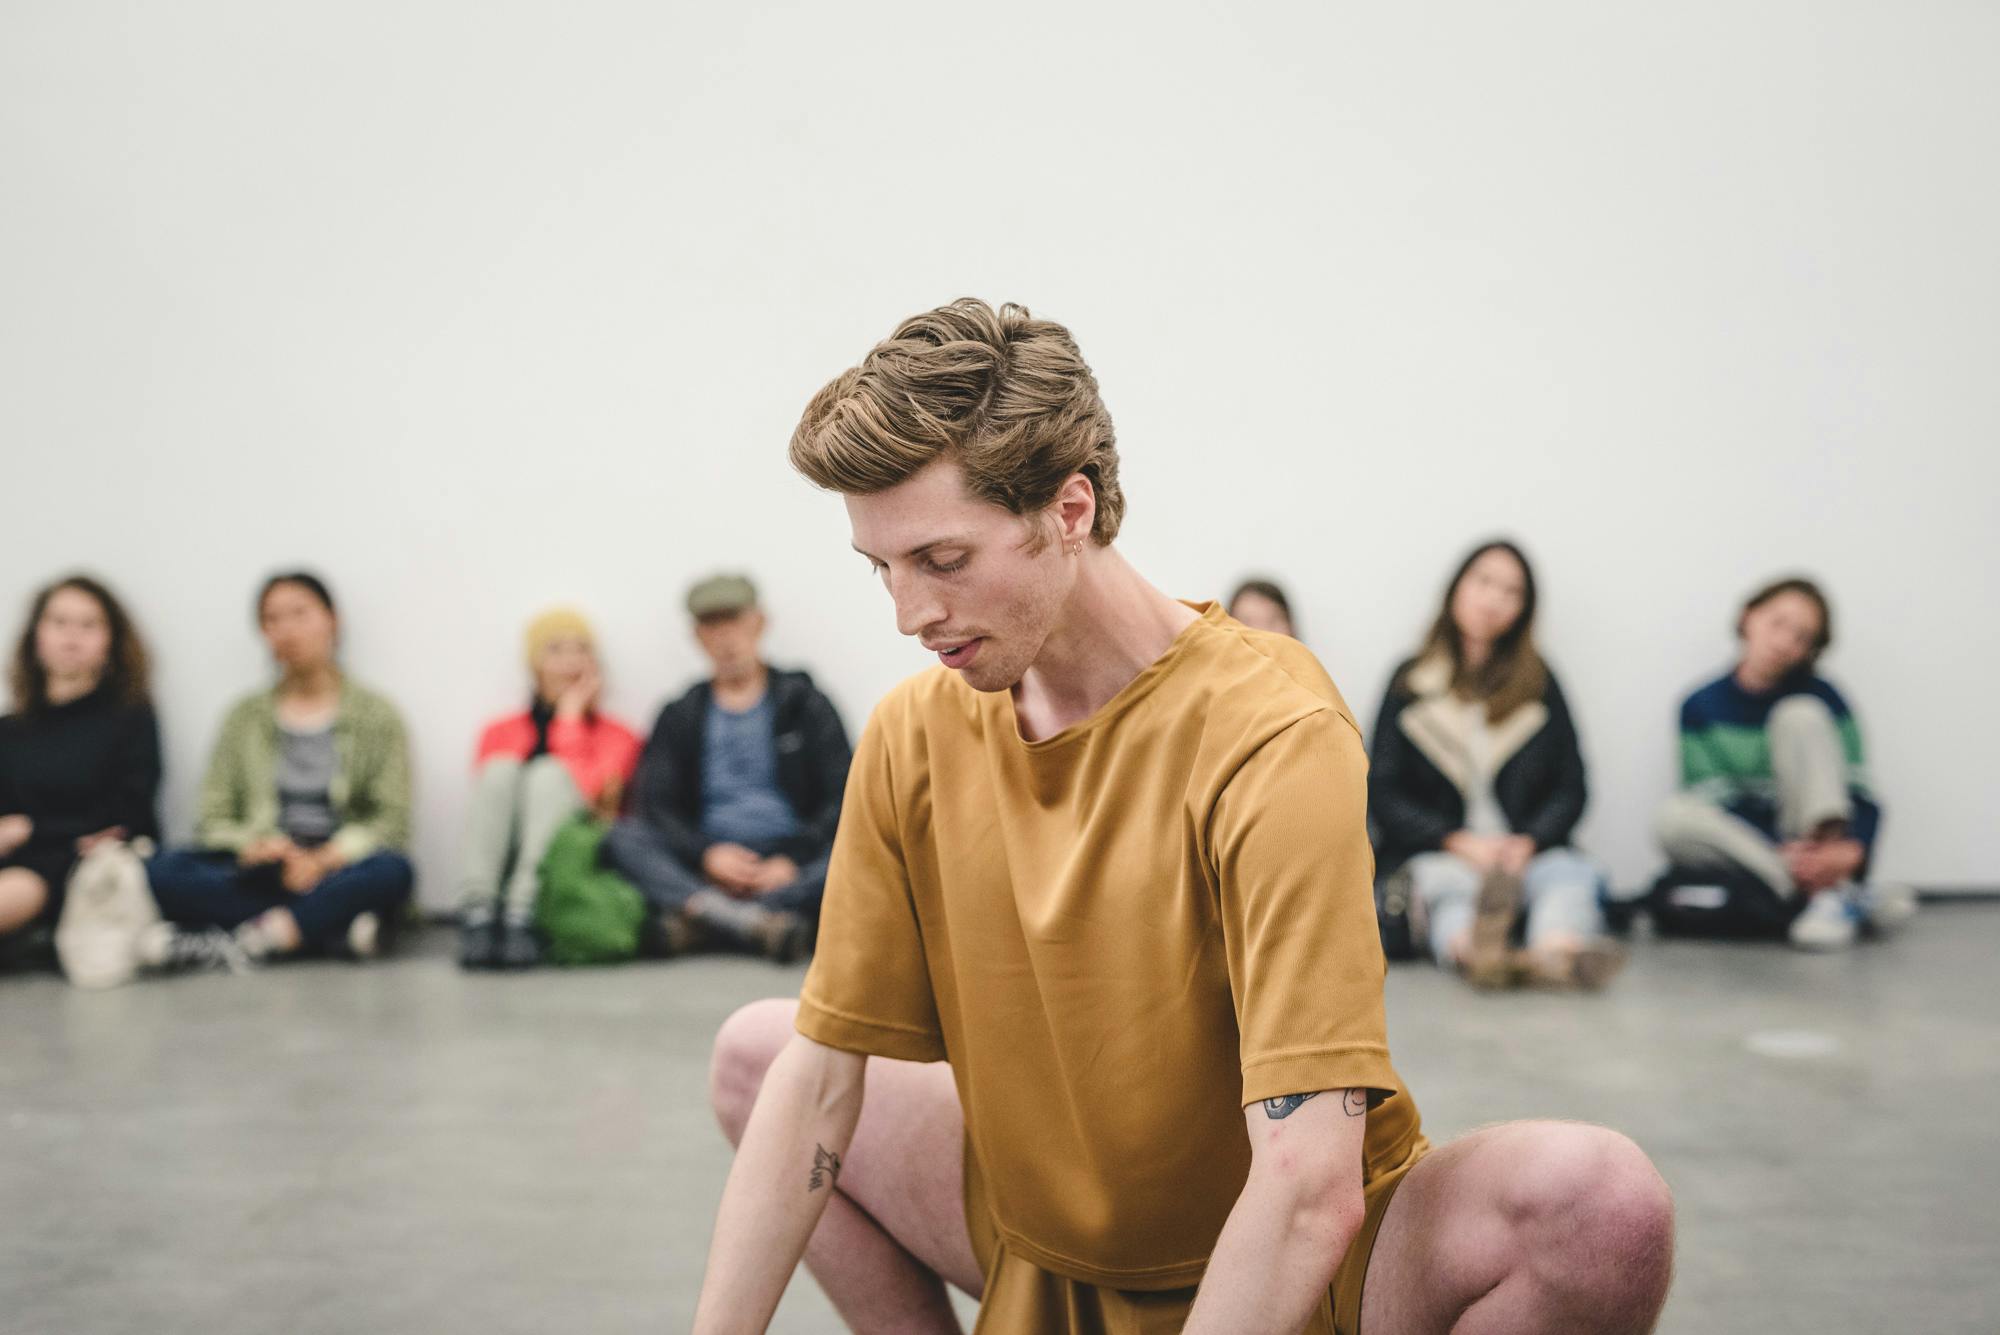 Andrew Bartee wearing a mustard coloured outfit is squatting in the middle of the gallery space. The artist’s eyes are almost closed and casted down to the floor. 